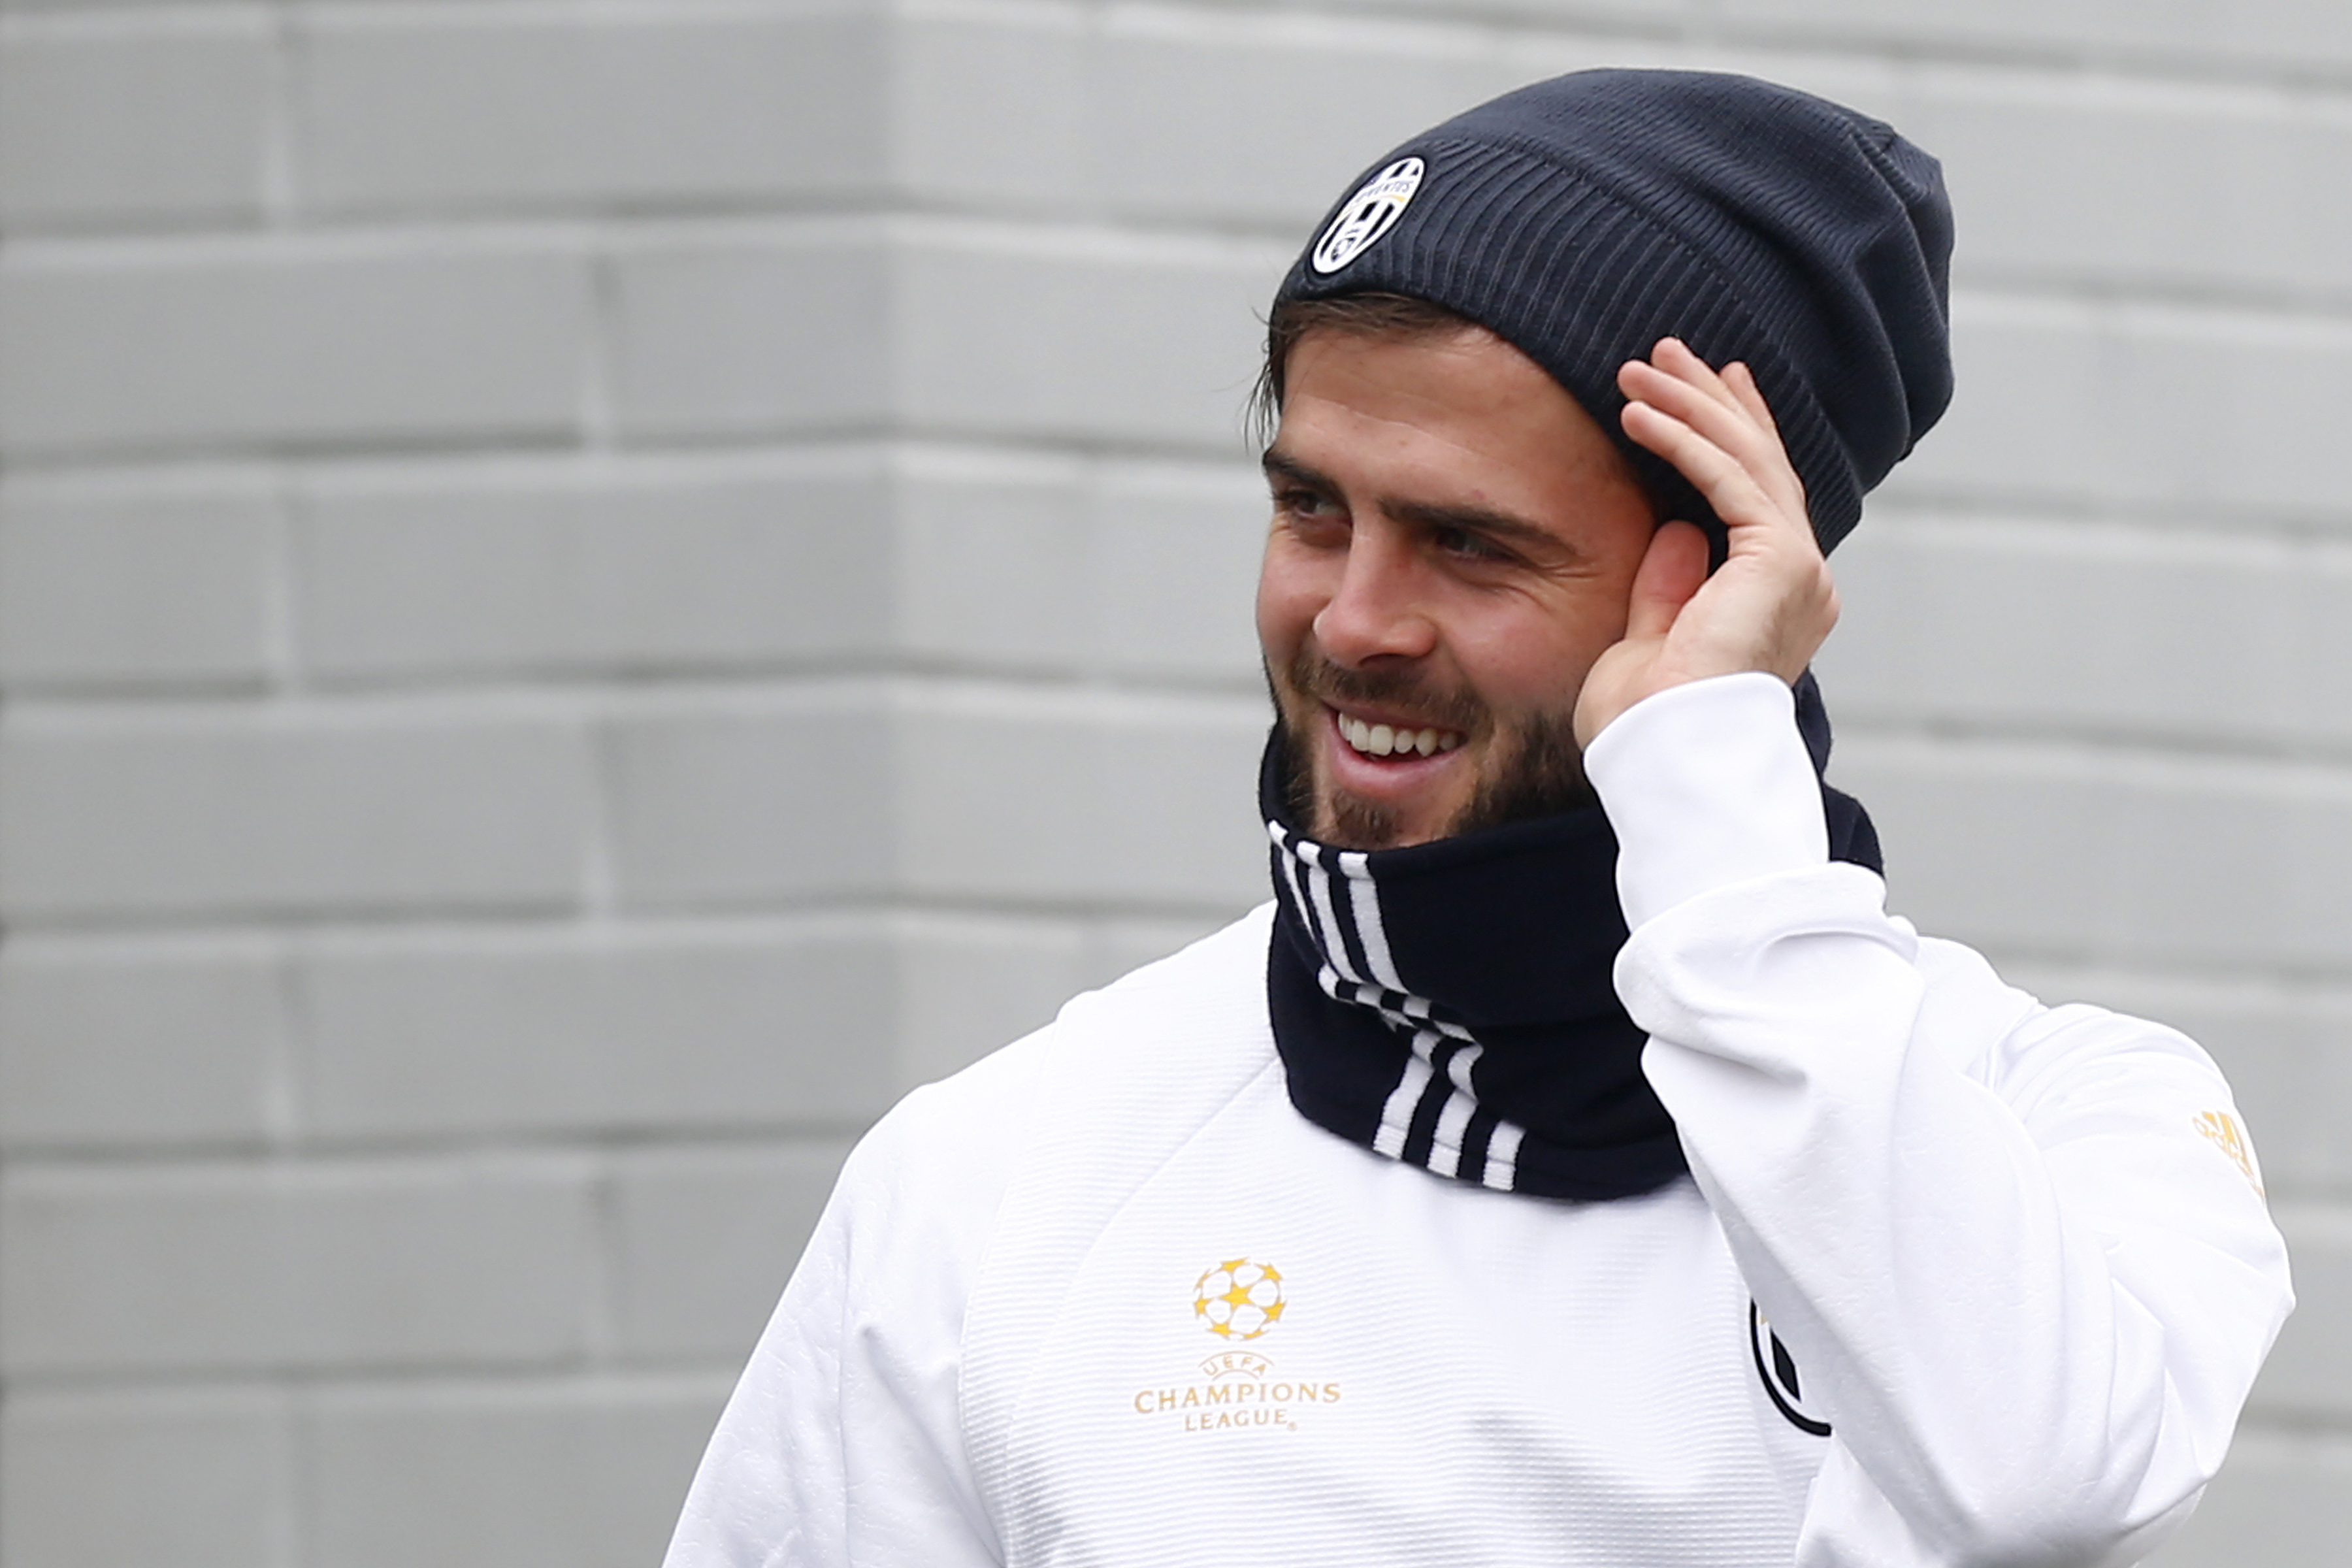 Juventus' midfielder Miralem Pjanic takes part in a training session on the eve of the UEFA Champions League football match FC Porto Vs Juventus on February 21, 2017 at the 'Juventus Training Center' in Vinovo, near Turin.  / AFP / Marco BERTORELLO        (Photo credit should read MARCO BERTORELLO/AFP/Getty Images)